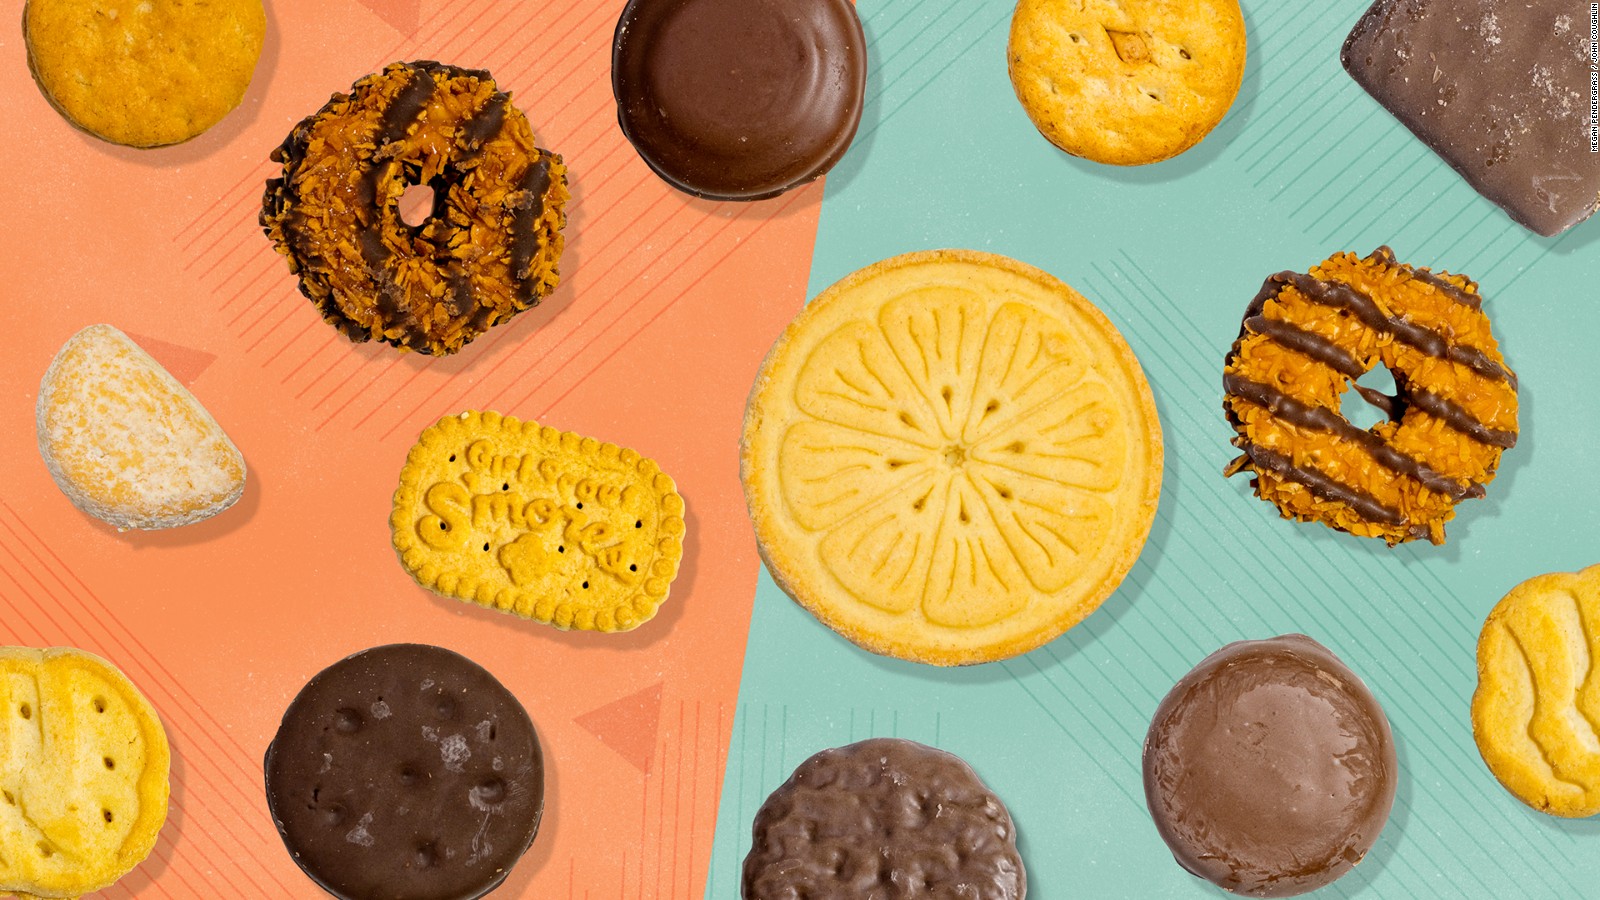 There's a new Girl Scout cookie in town. Meet the inspiring LemonUps CNN